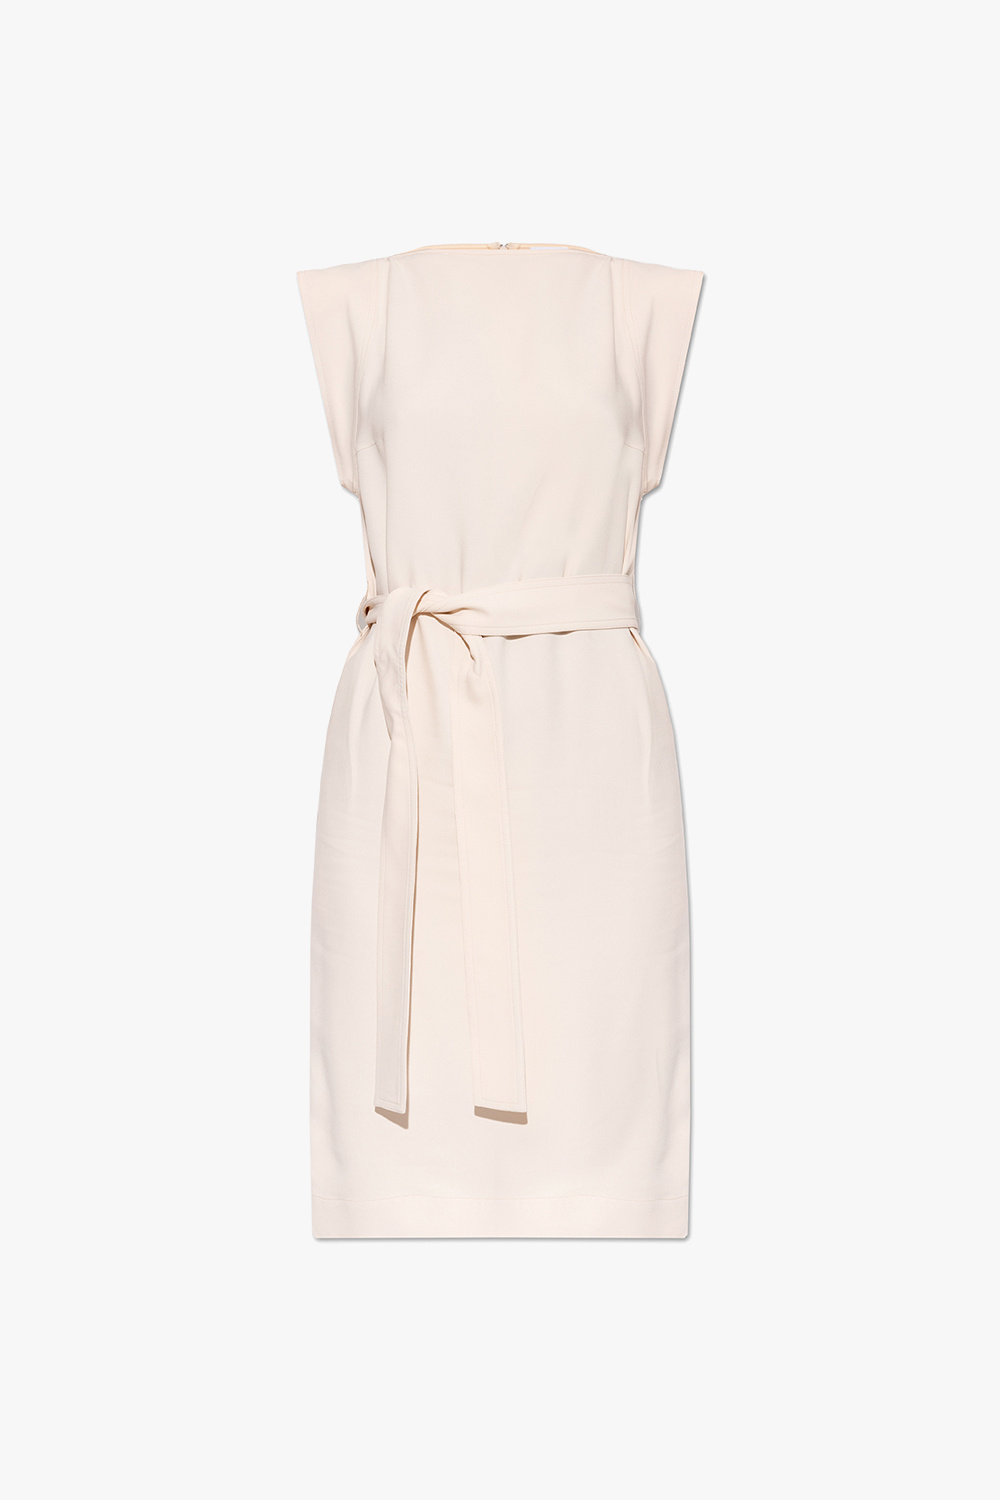 Burberry ‘Alina’ belted dress